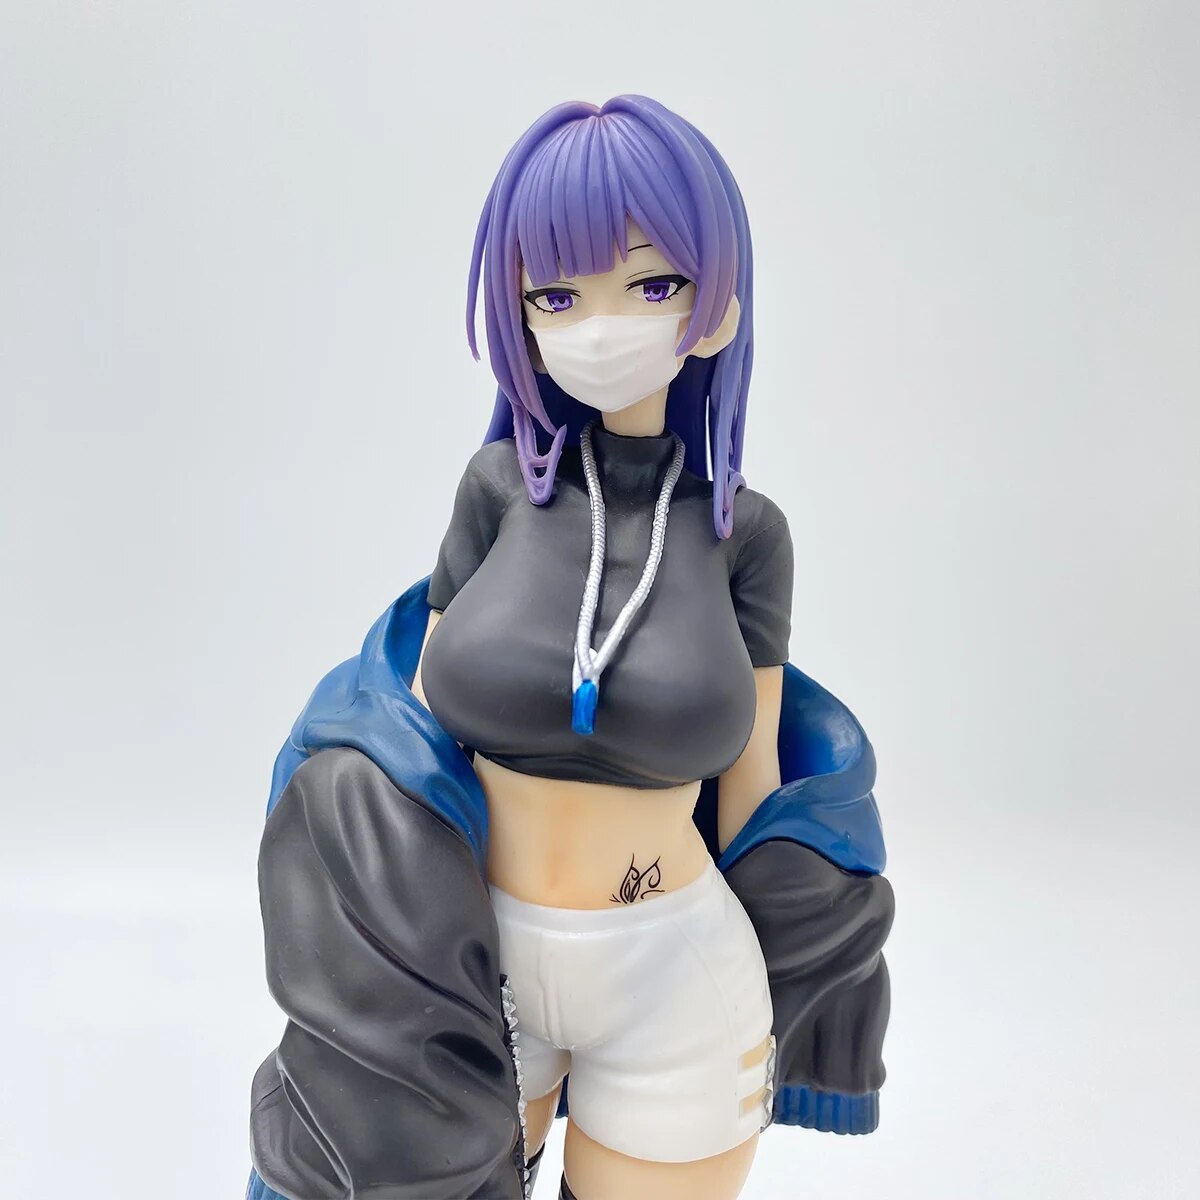 25cm Masked Girl Yuna illustration by Biya Anime Figure Guitar Sisters Action Figure Adult Sexy Girl Collectible Model Doll Toys